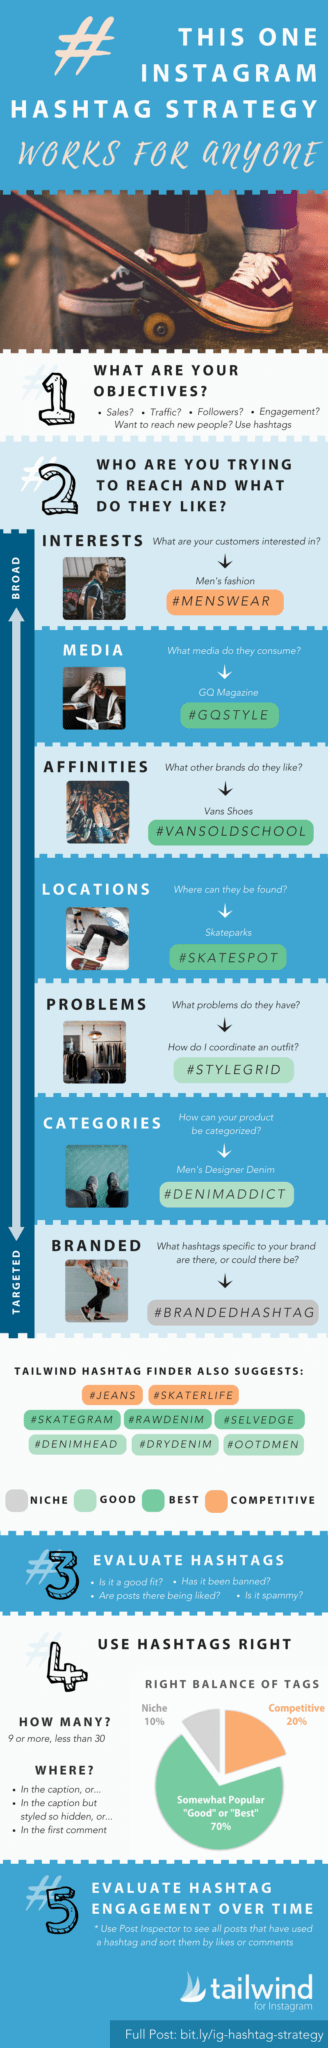 This infographic takes you through 5 simple steps to create an Instagram hashtag strategy